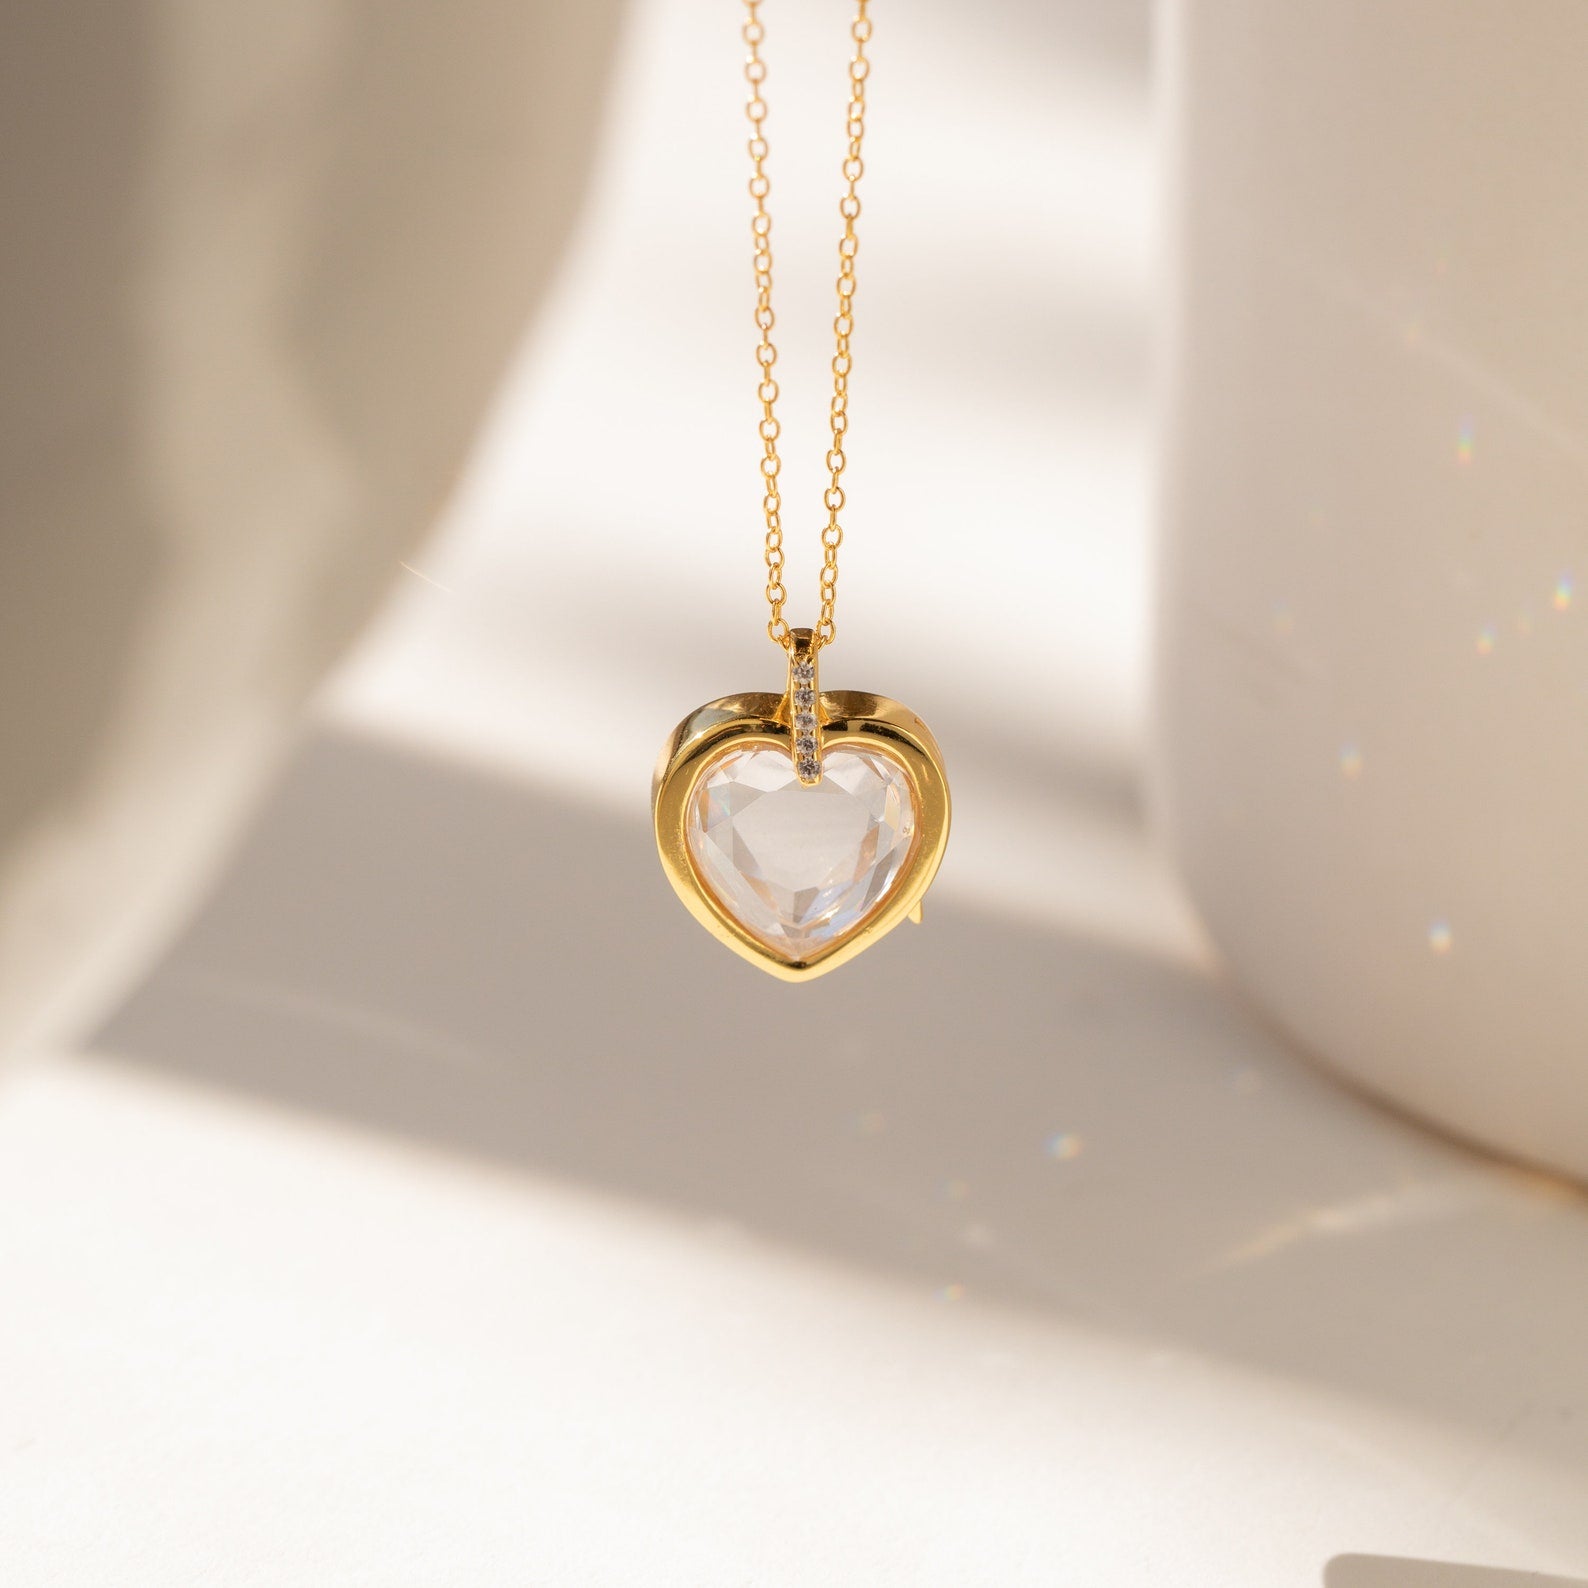 Ben-Amun 24k Gold Electroplate Chain Necklace with Heart Locket Pendant |  Neiman Marcus